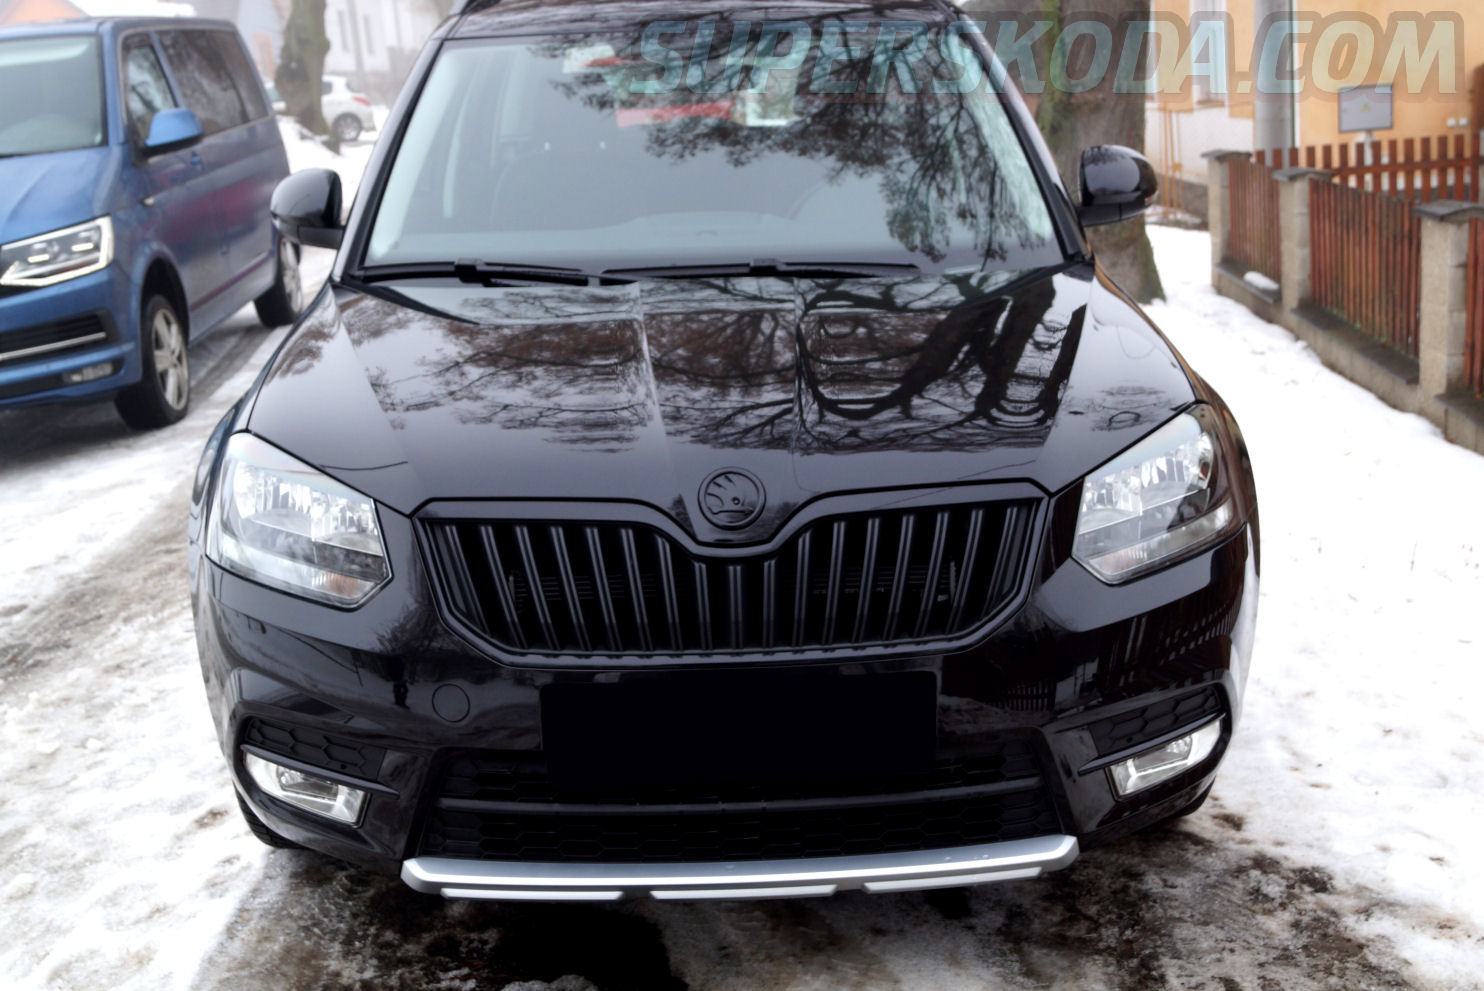 On the road: Skoda Yeti Black Edition – car review